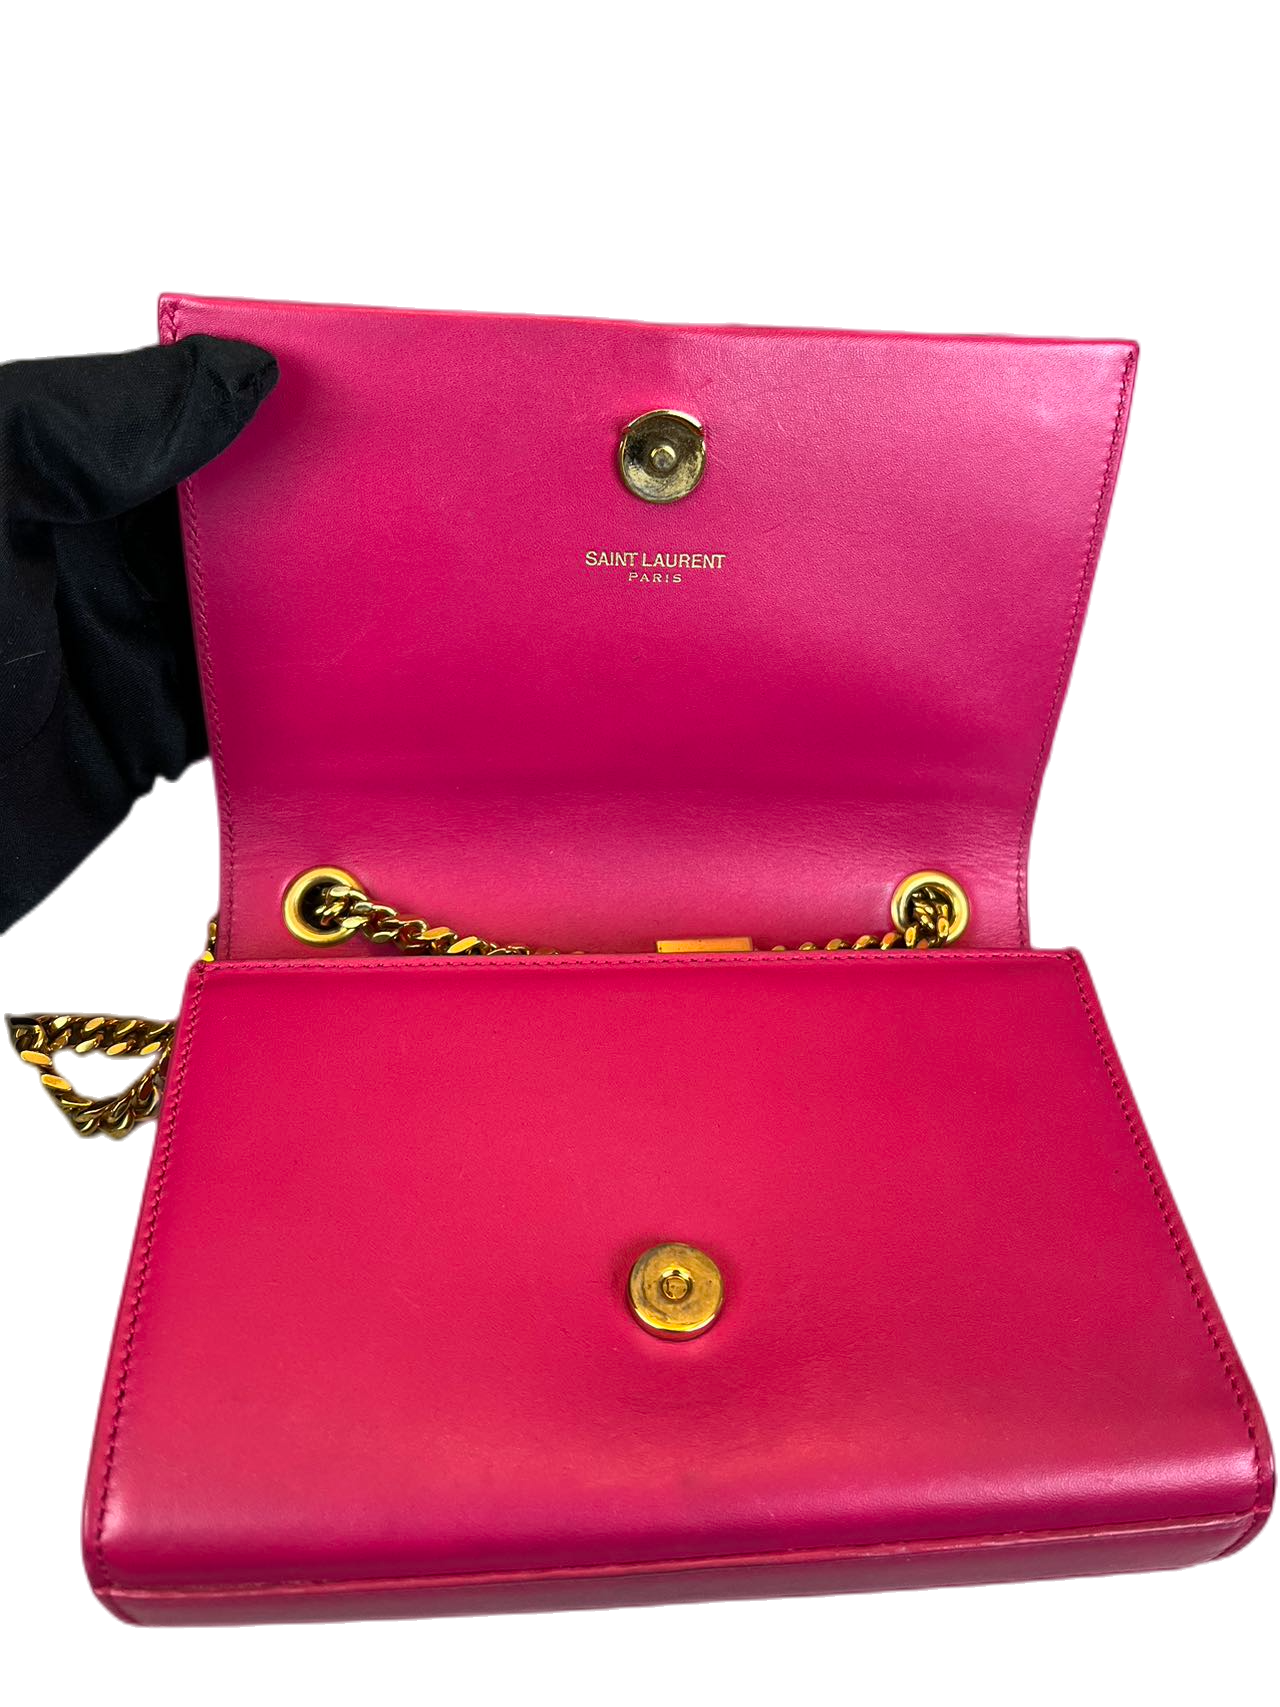 Yves Saint Laurent Pink Leather Small Kate Chain Shoulder Bag